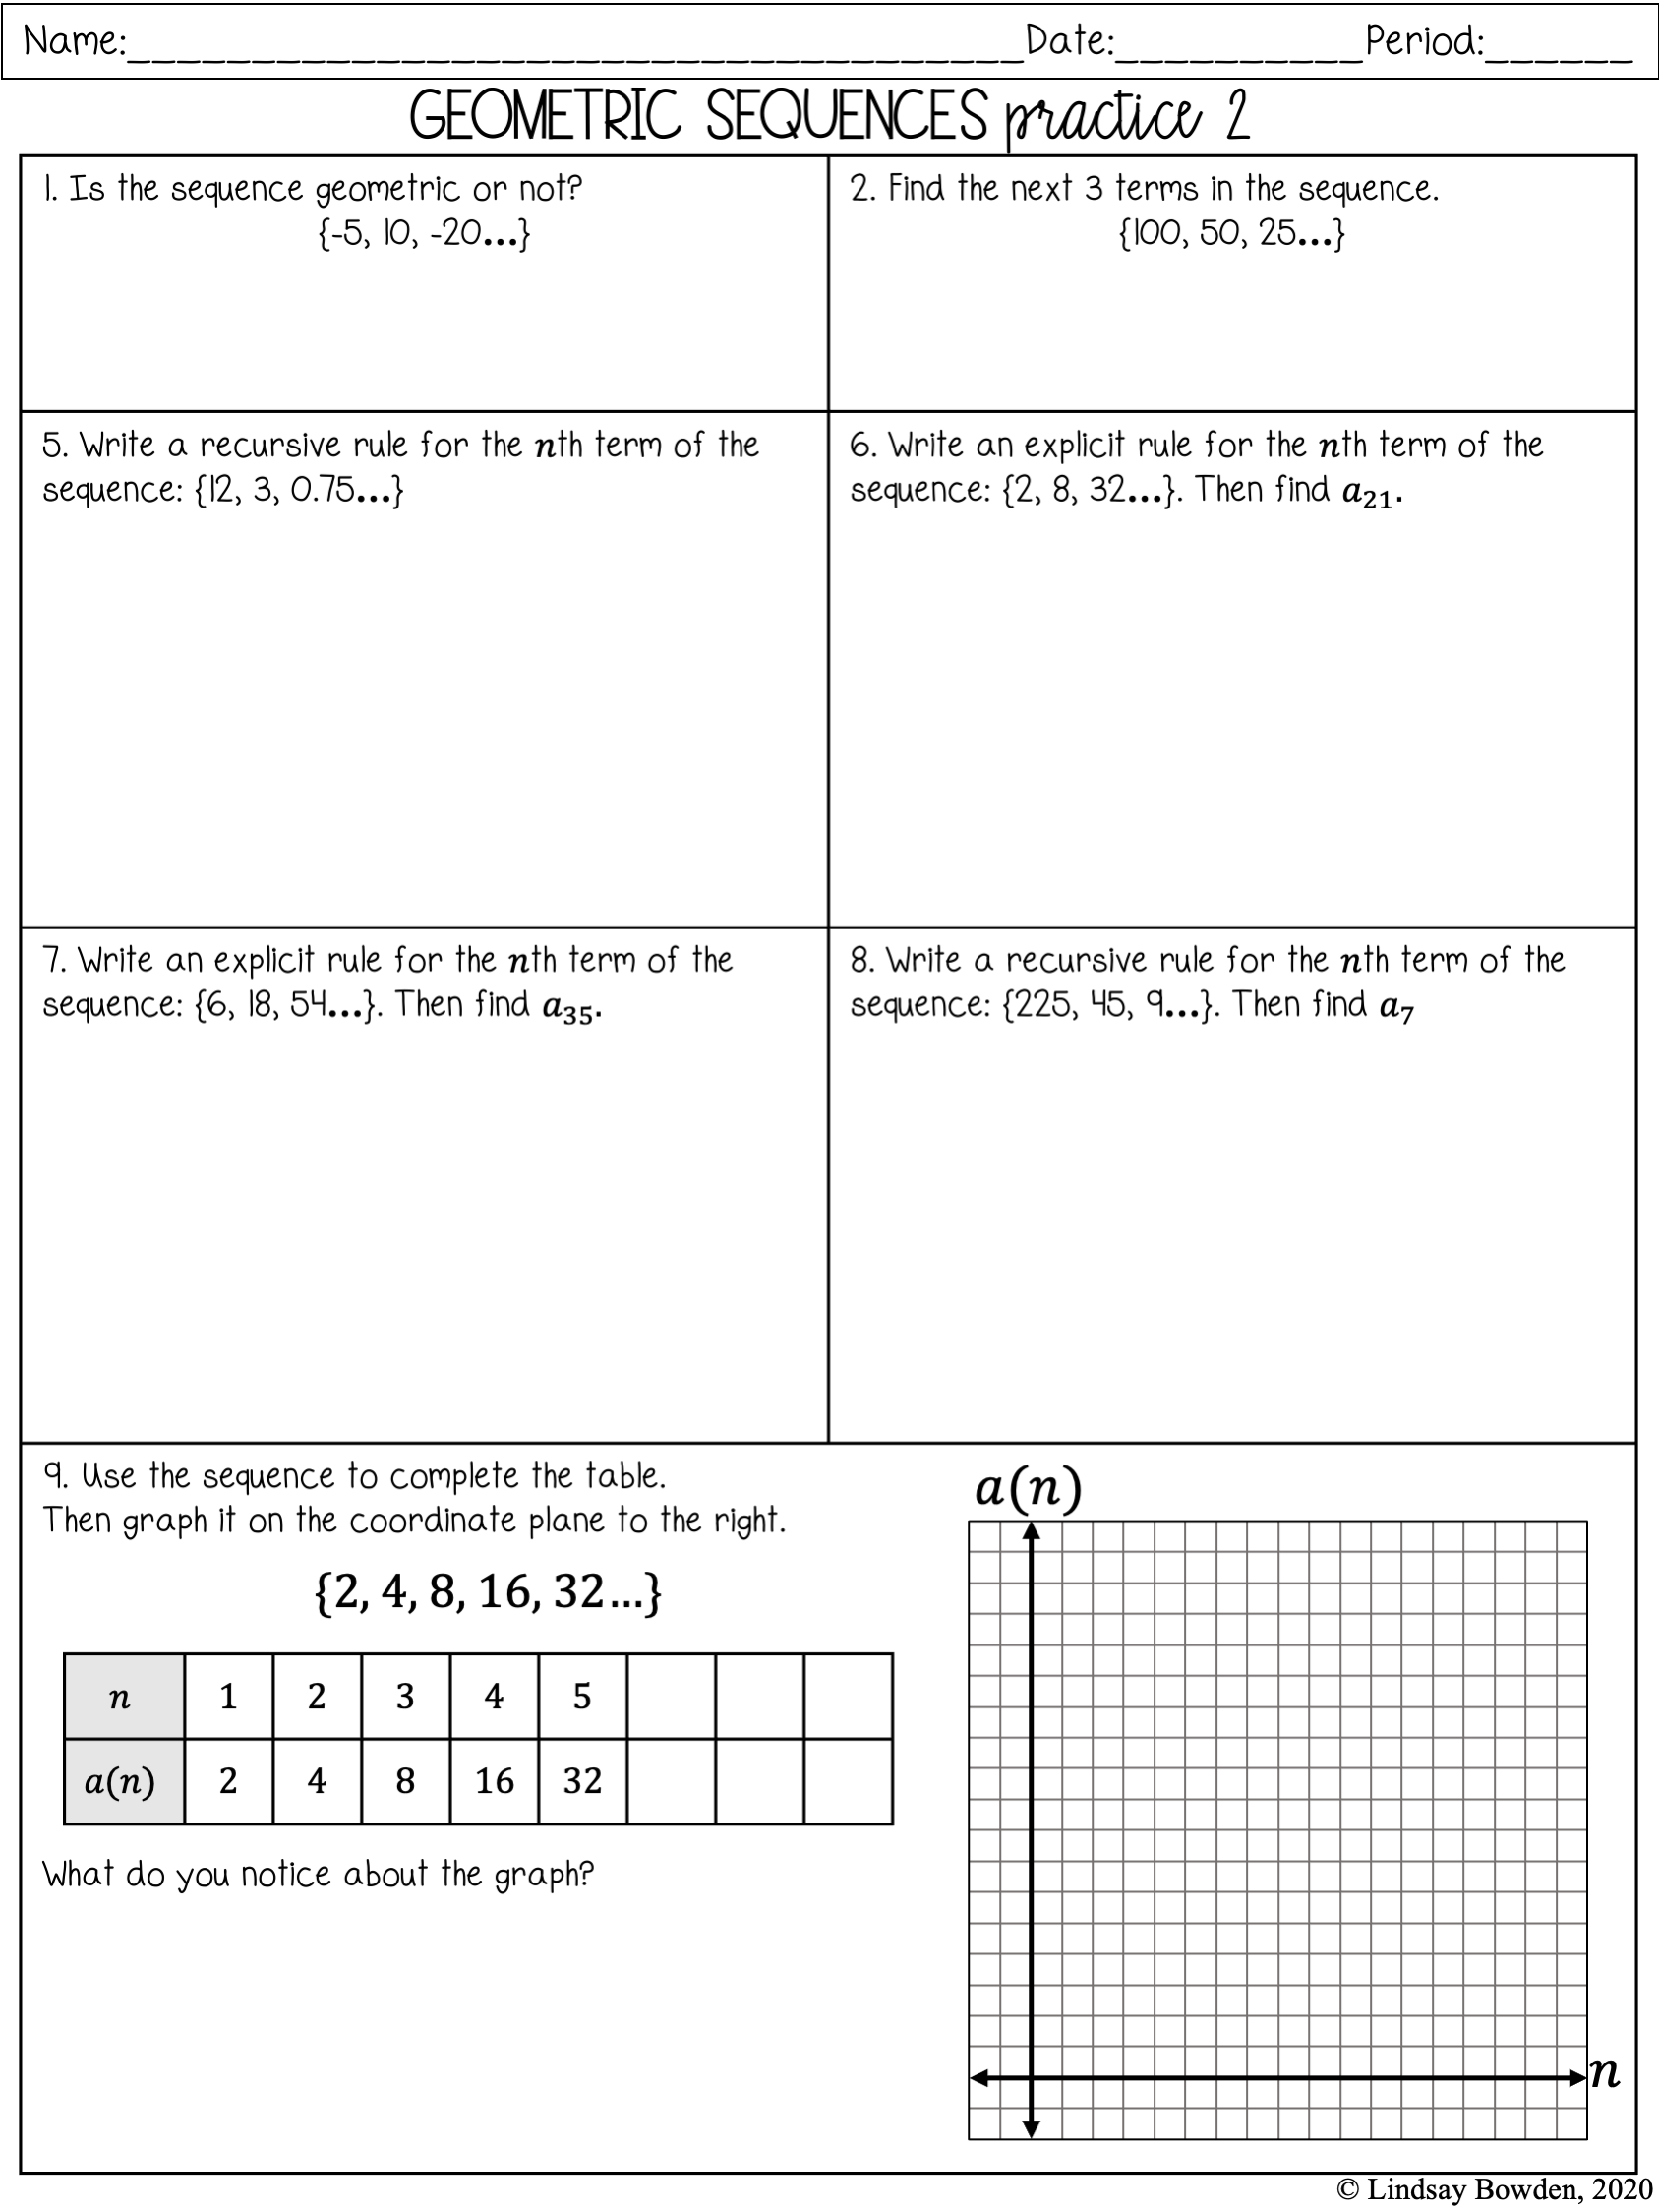 Geometric Sequences Notes and Worksheets - Lindsay Bowden For Geometric Sequences Worksheet Answers